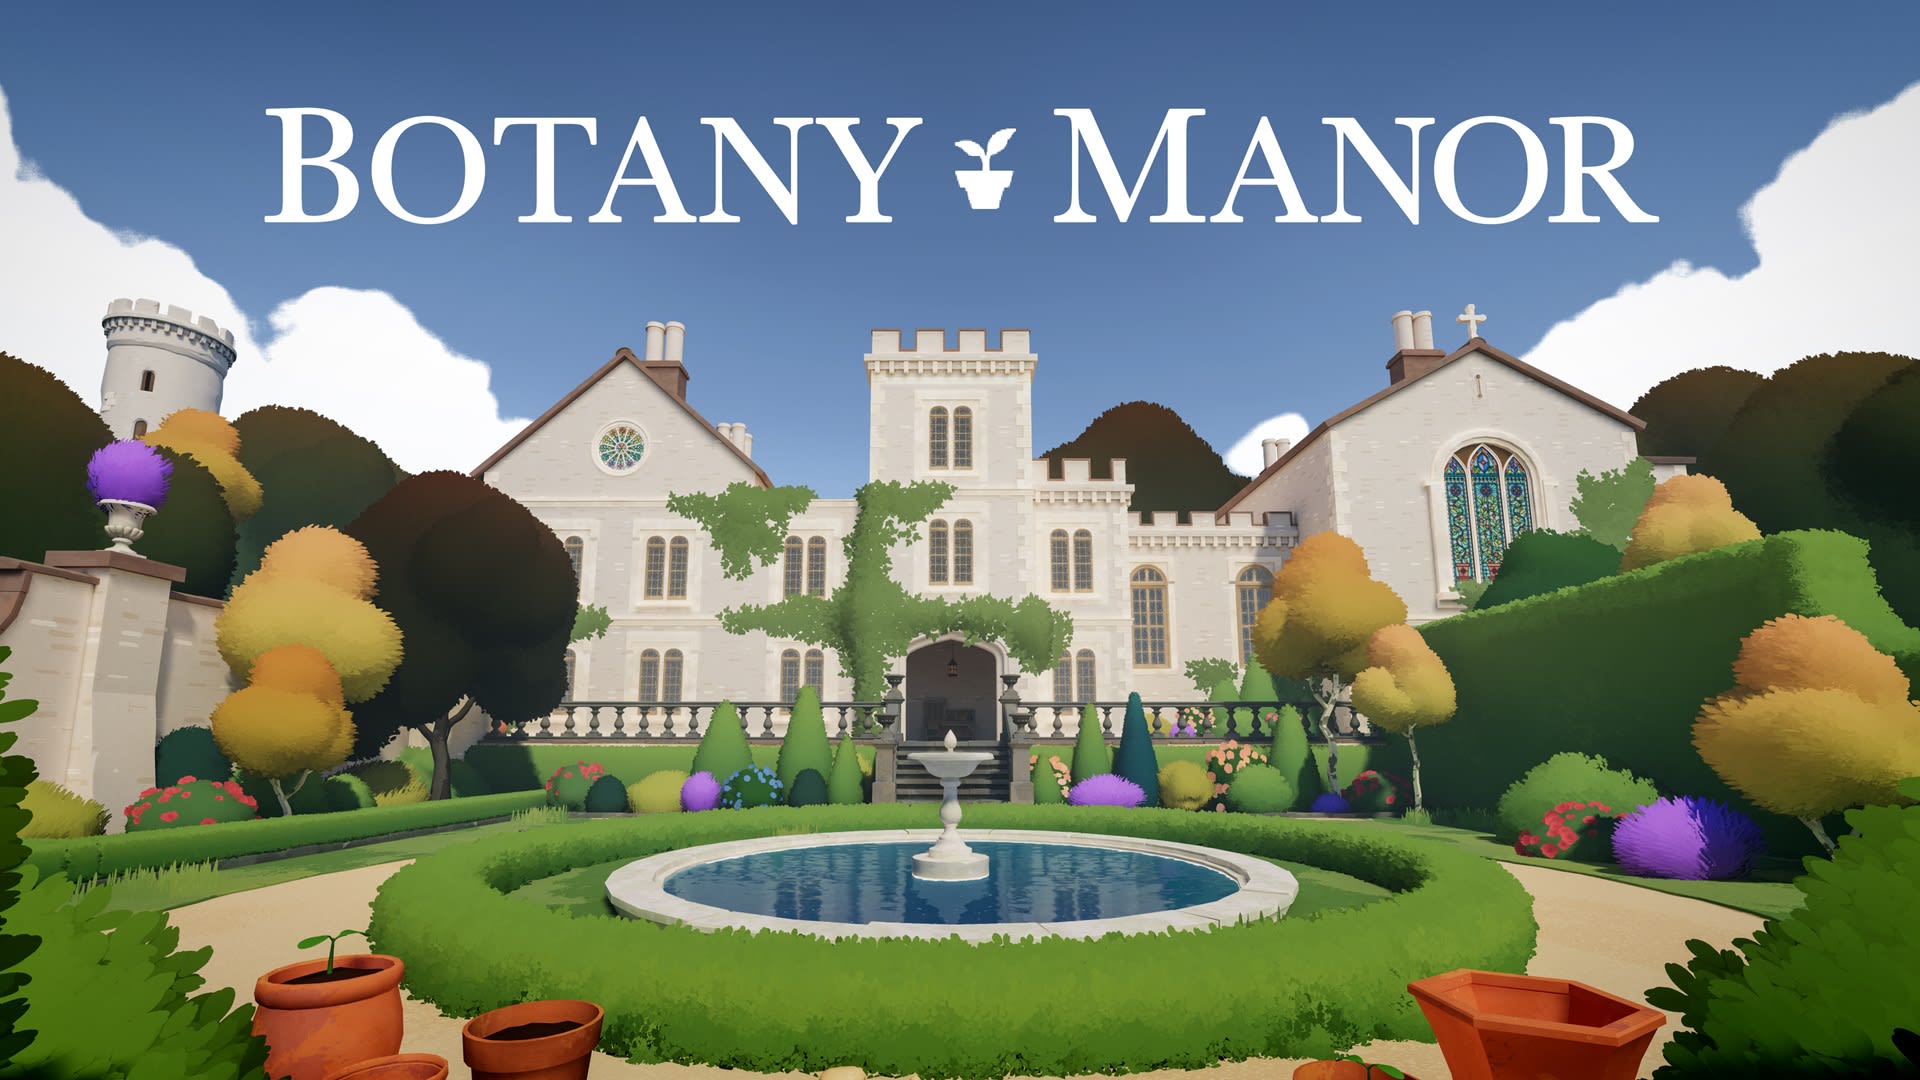 Botany Manor key art showing the game's logo above a mansion.